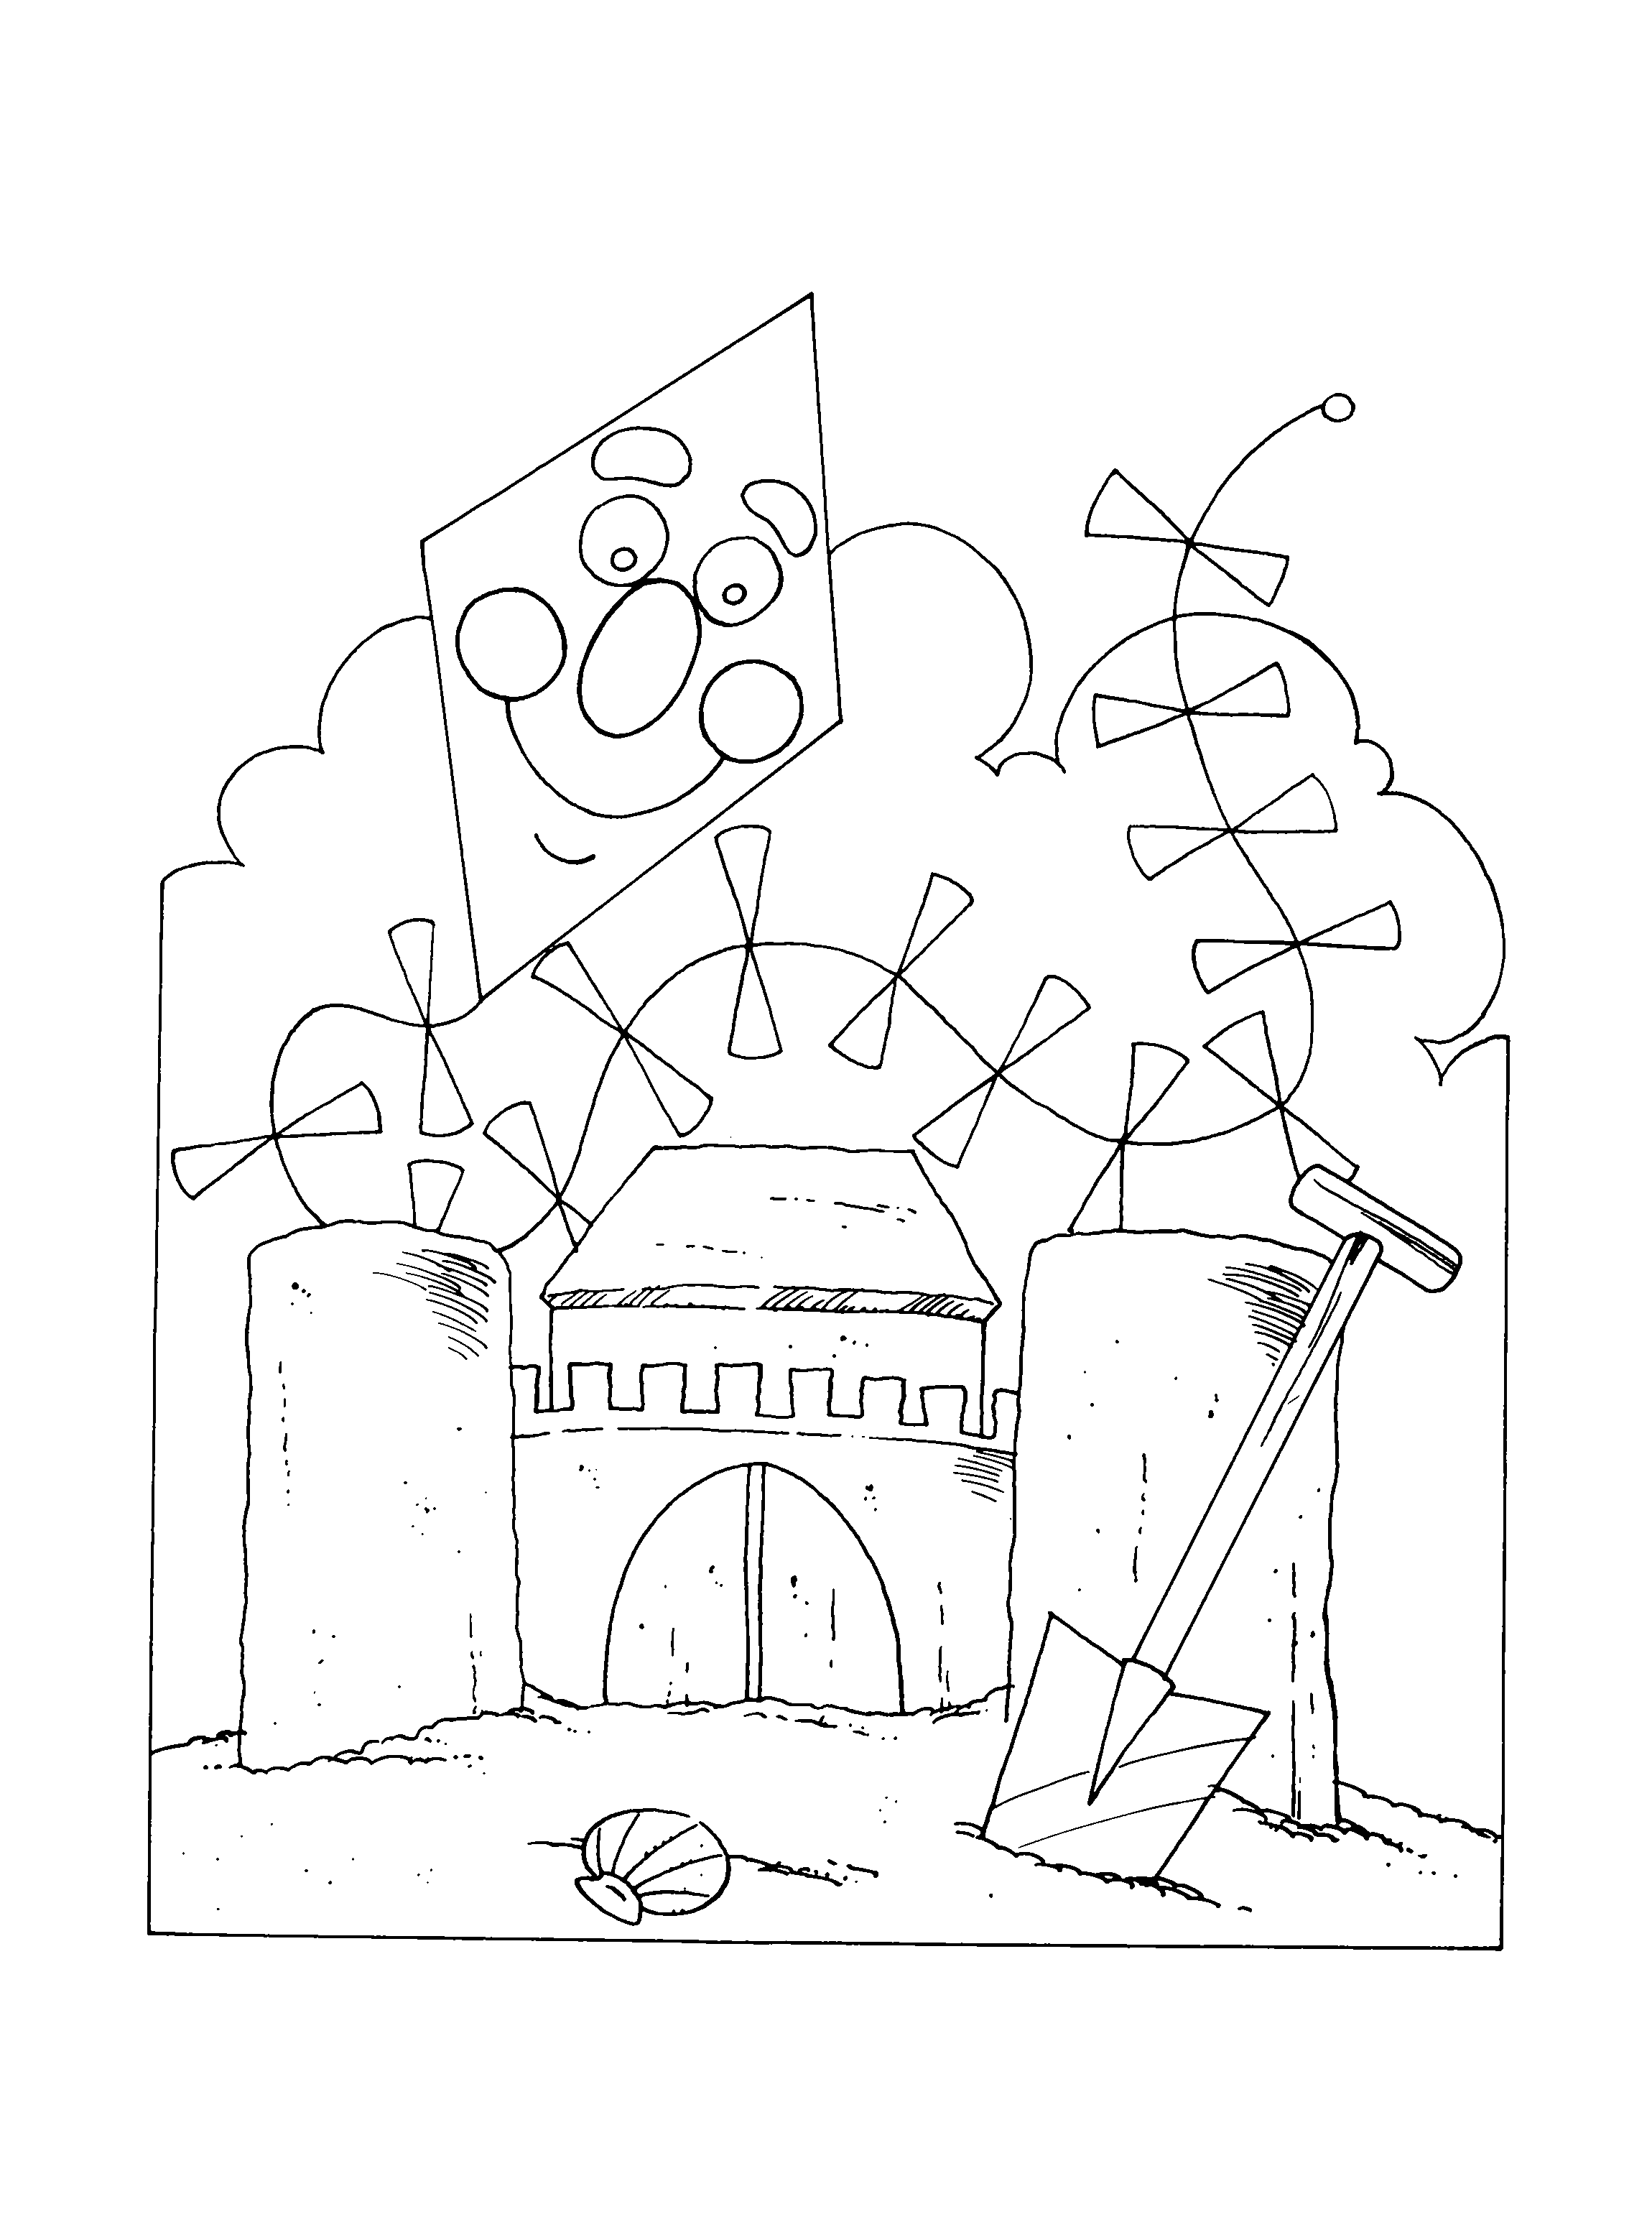 Spike and suzy coloring pages